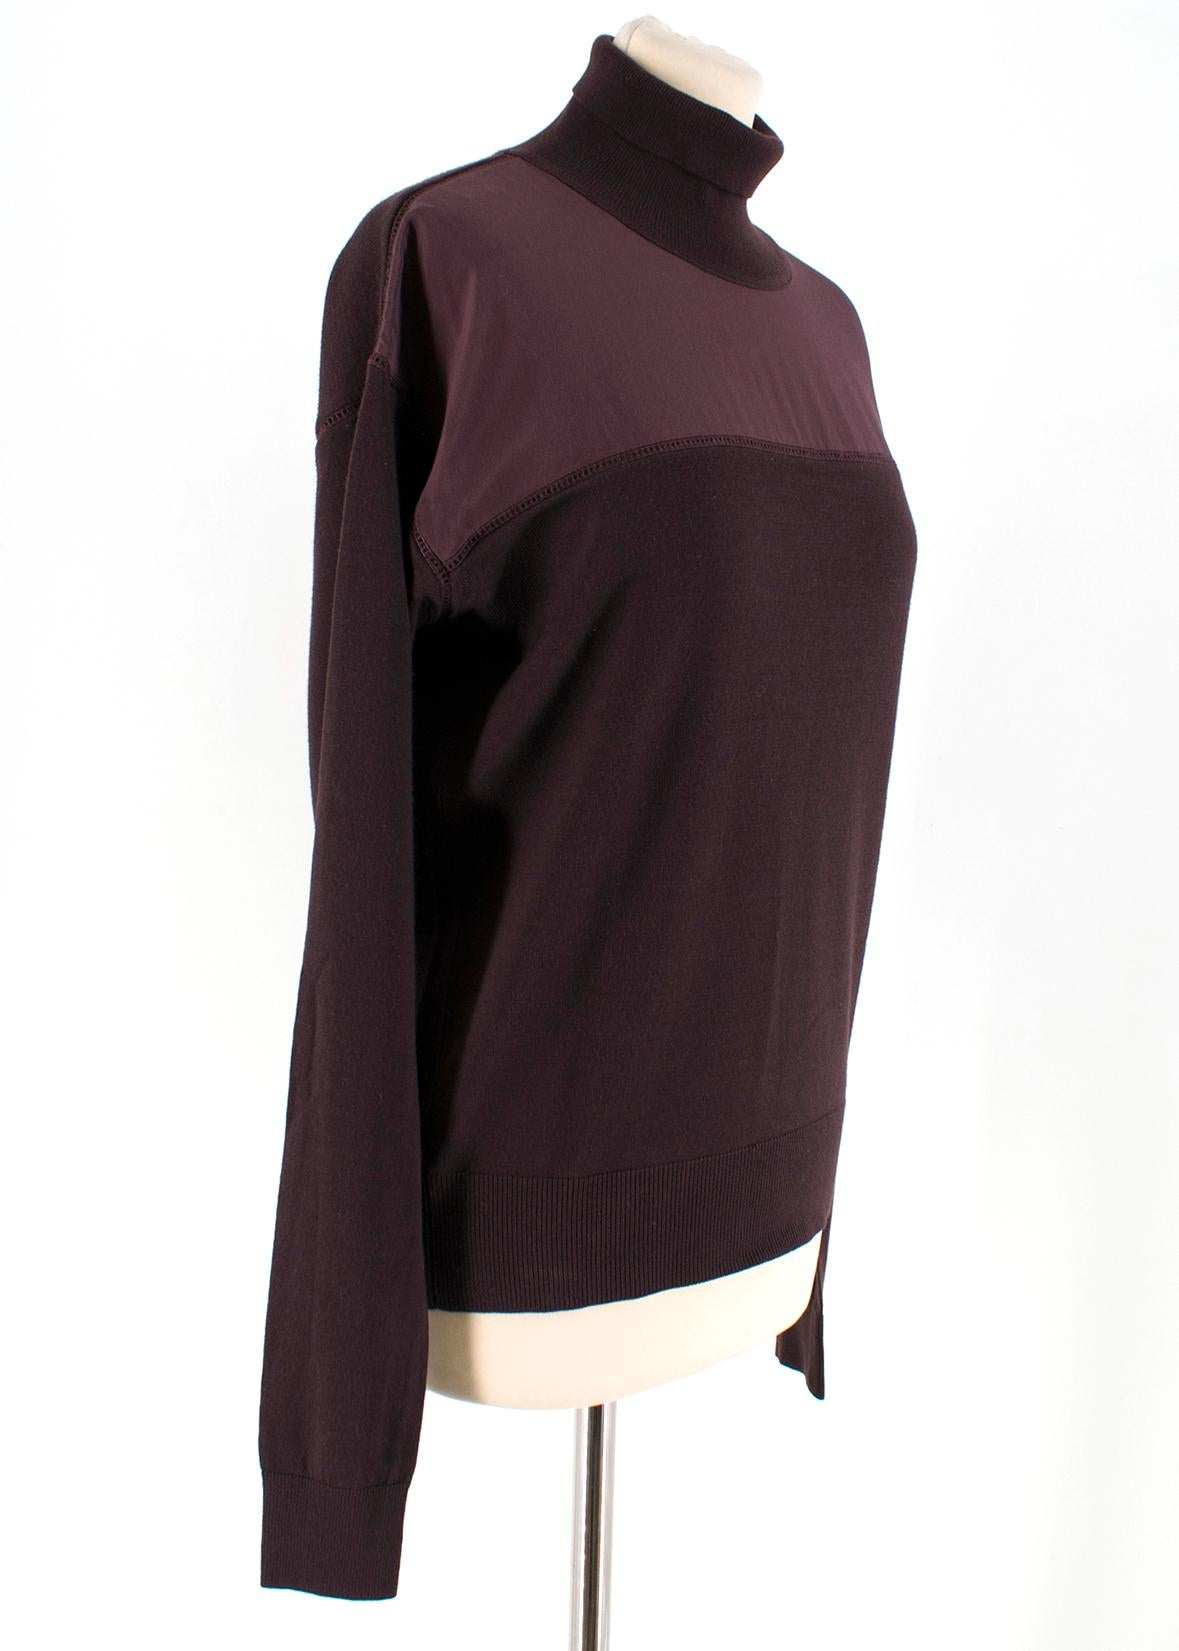 Chloe Burgundy Wool Turtleneck Sweater

- Burgundy wool sweater
- Lightweight
- Turtleneck
- Long sleeved
- Ruched cuffs
- Front silk panel

Please note, these items are pre-owned and may show some signs of storage, even when unworn and unused. This